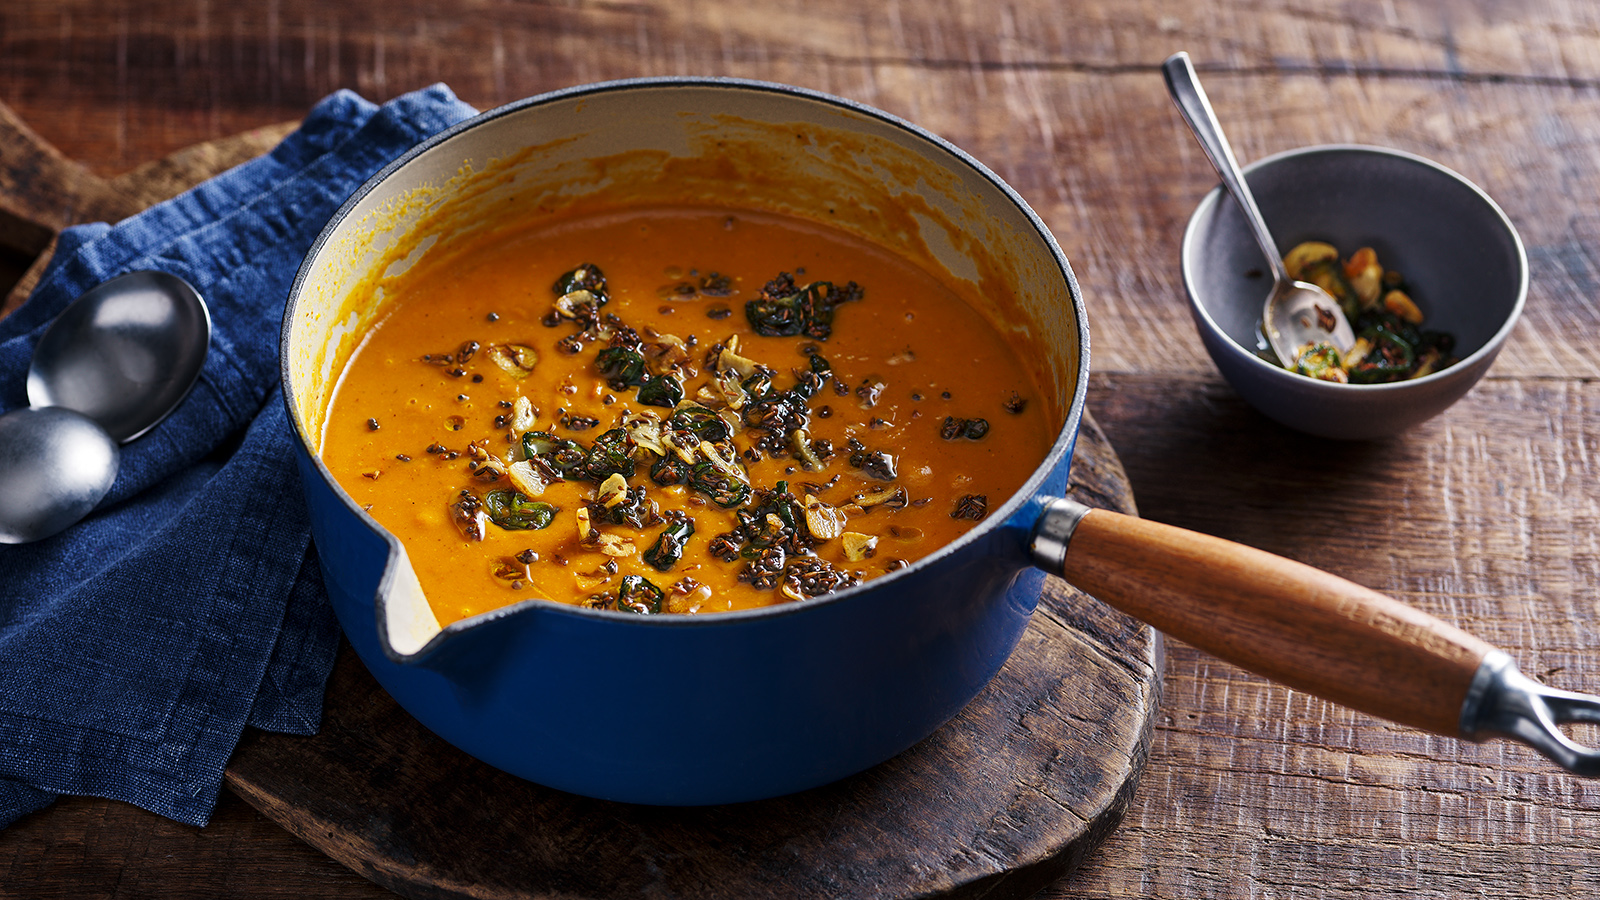 https://food-images.files.bbci.co.uk/food/recipes/curried_pumpkin_soup_04628_16x9.jpg